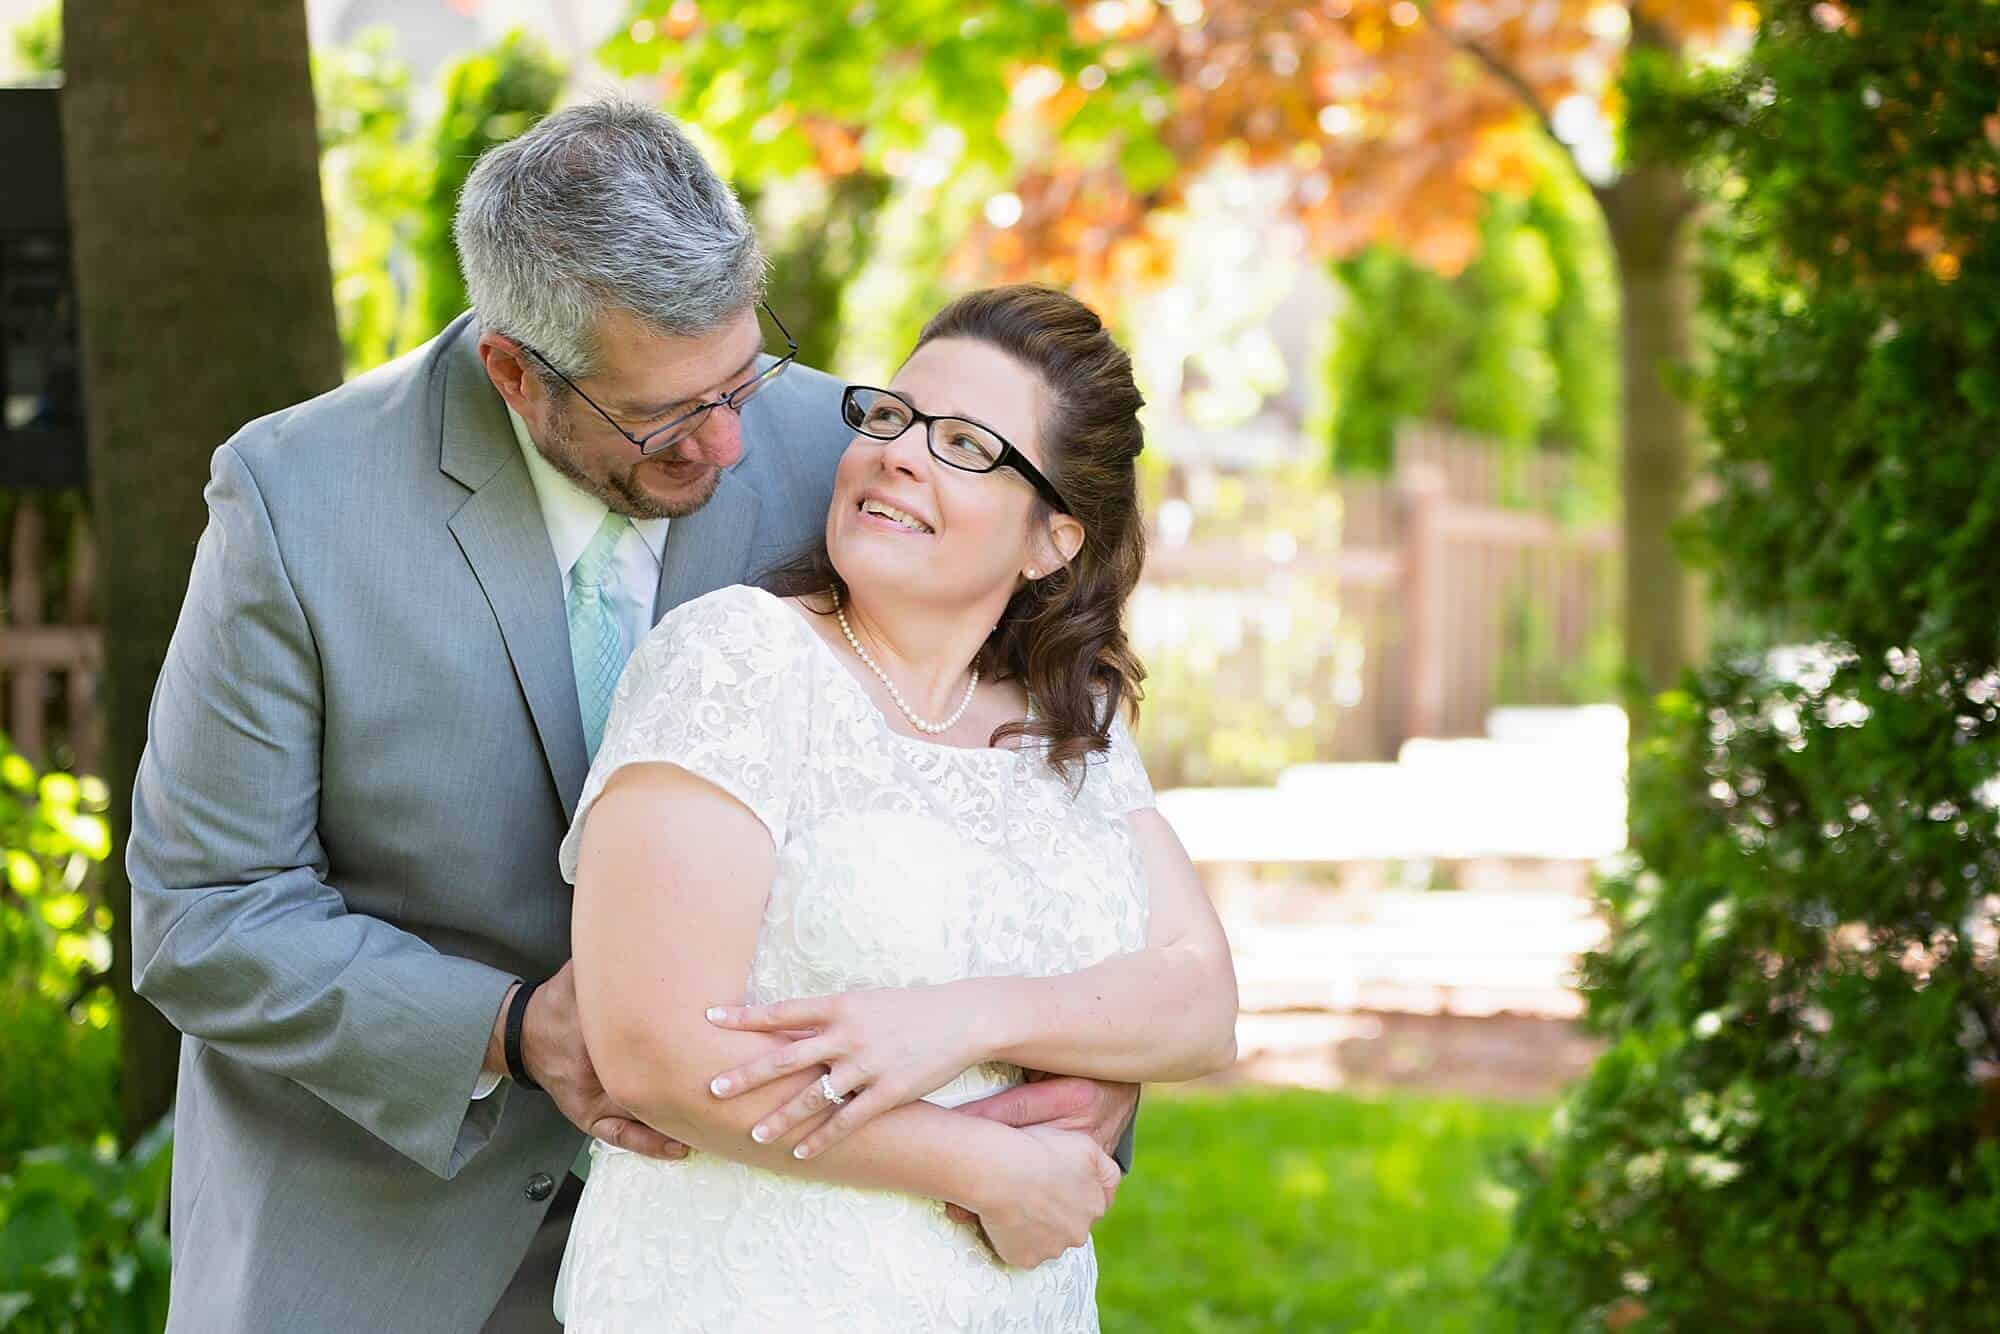 Husband & Wife at Spring Wedding at The Gardens in Allenton, WI